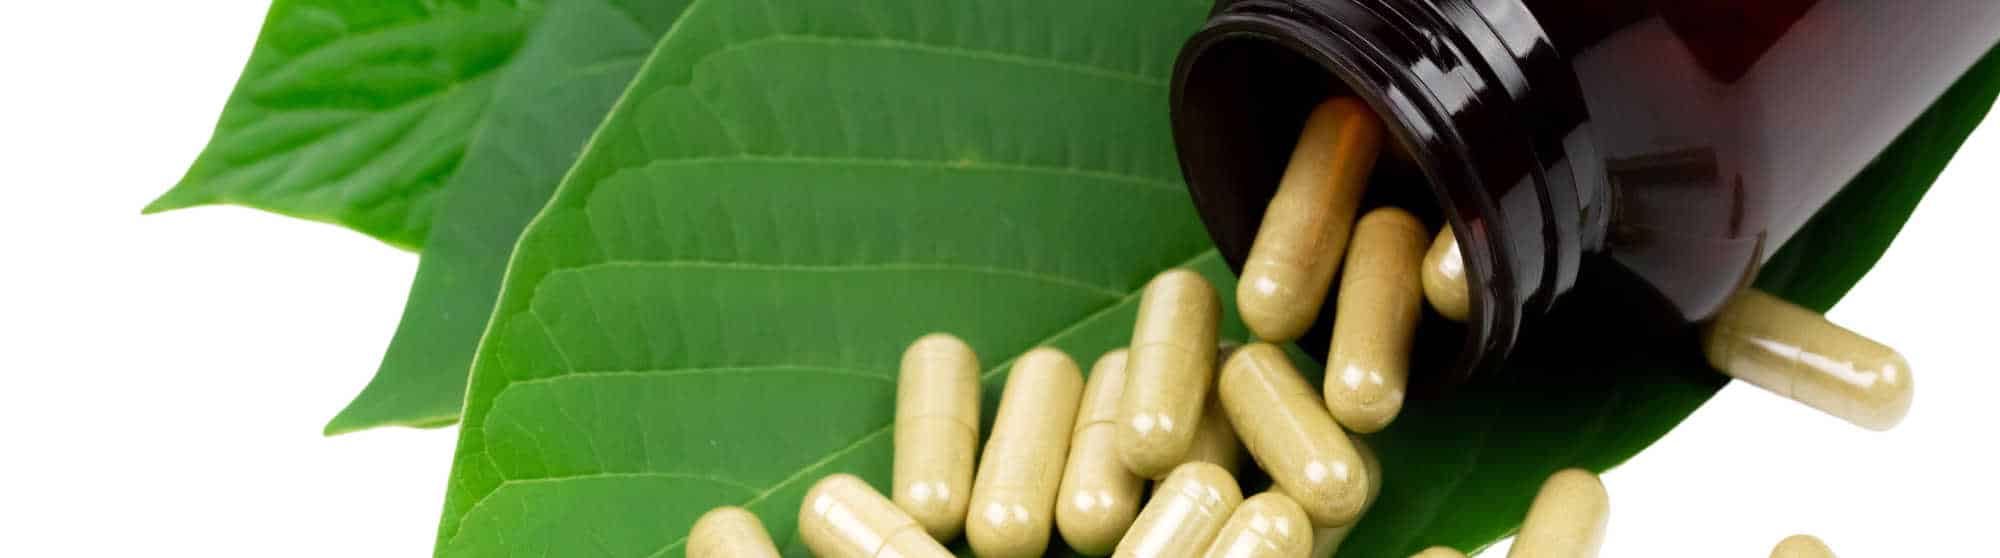 image of kratom capsules and leaves